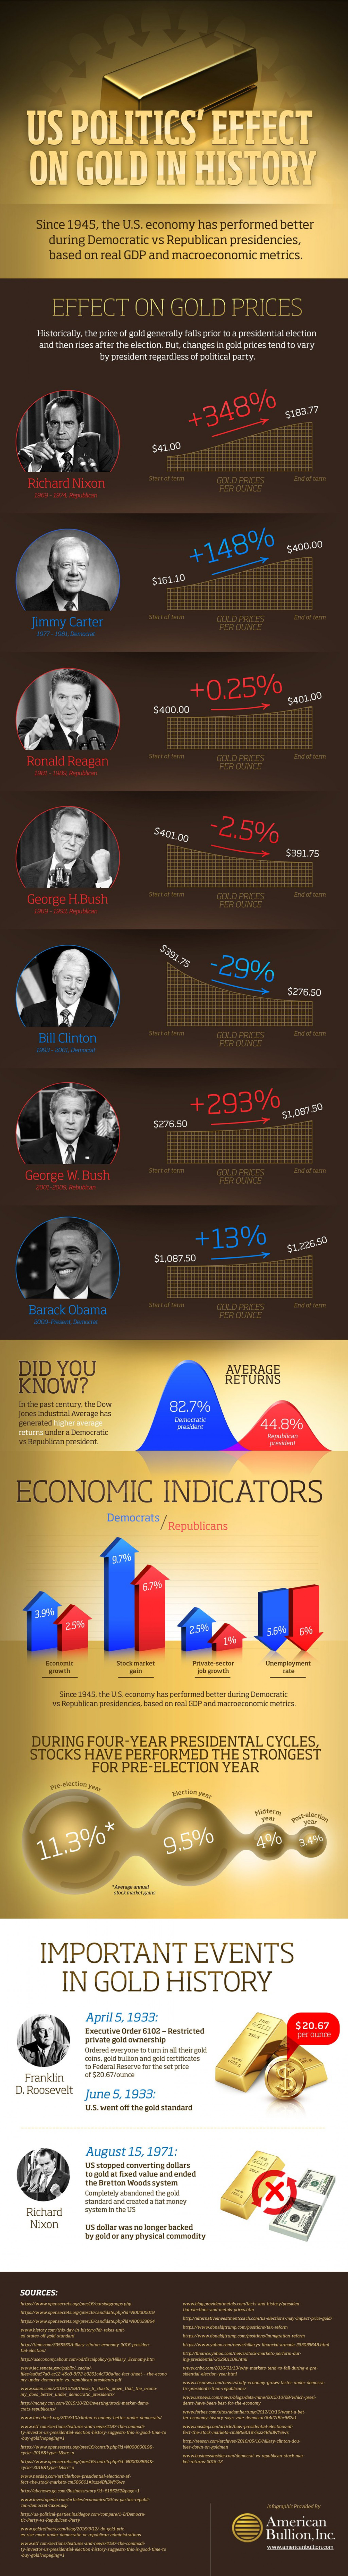 Presidential Candidates’ Effect on Economy & Gold Infographic